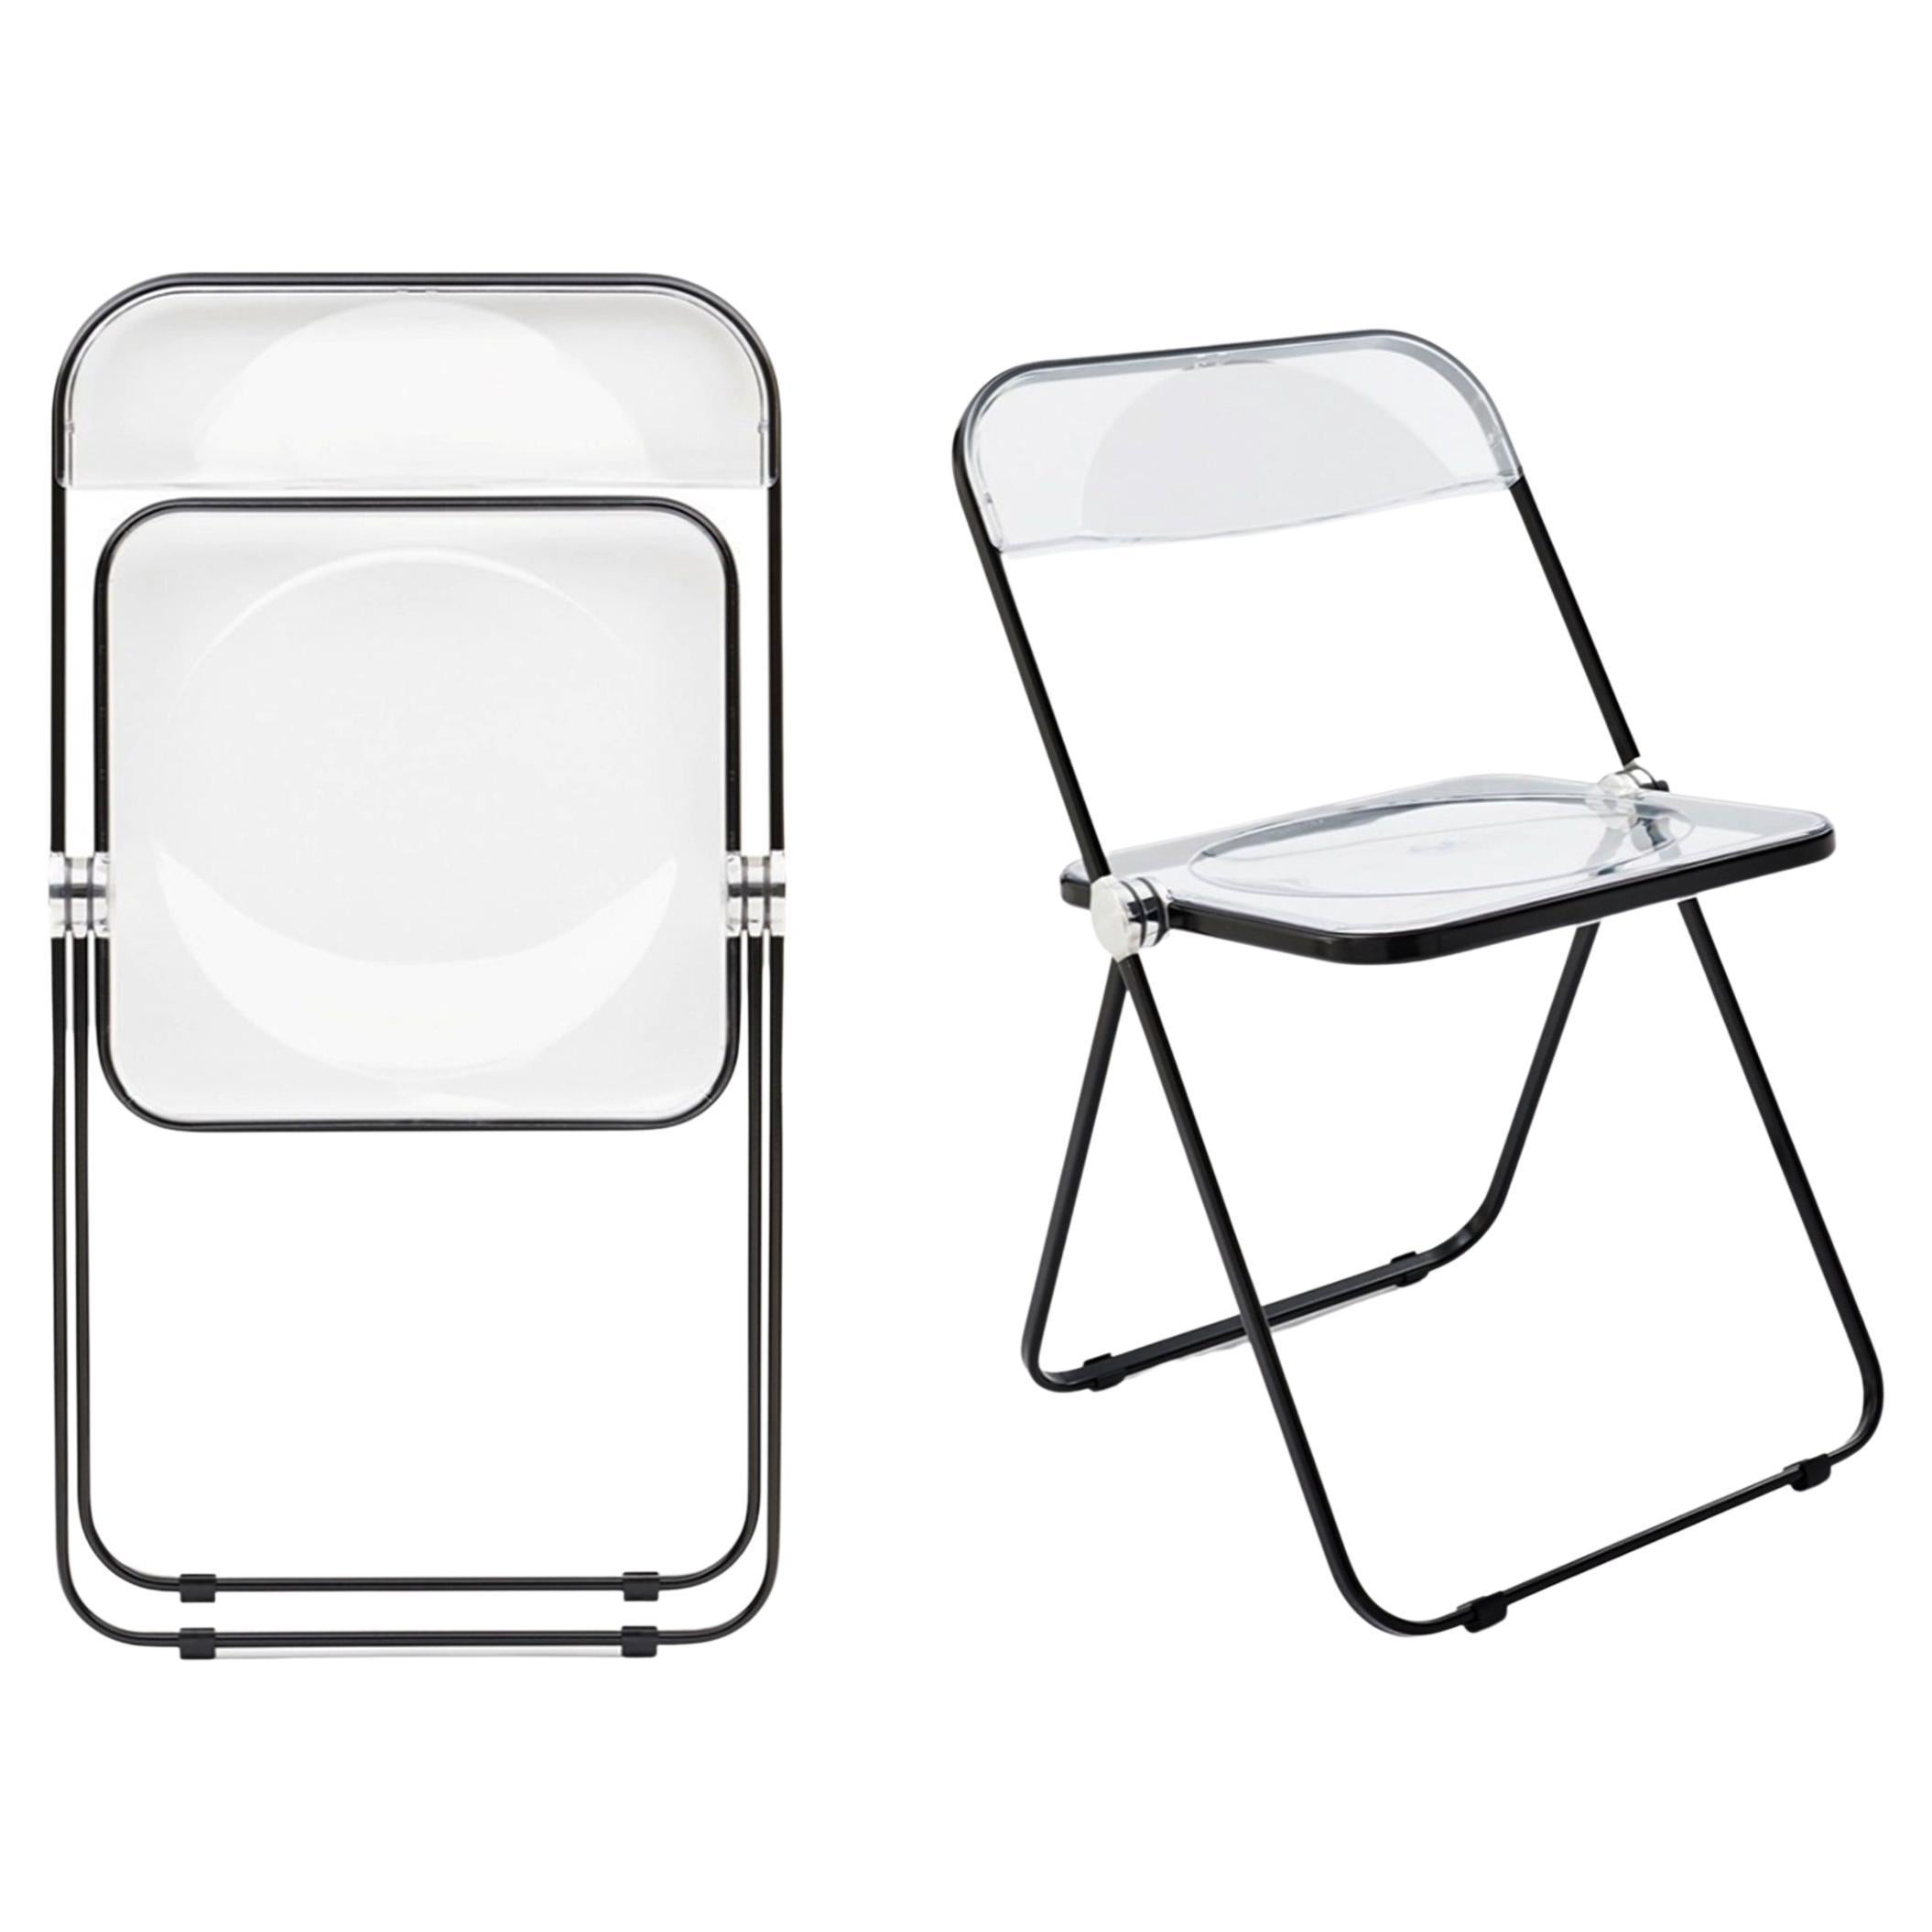 Pair of Black and Transparent Plia Chairs Giancarlo Piretti for Castelli Italy